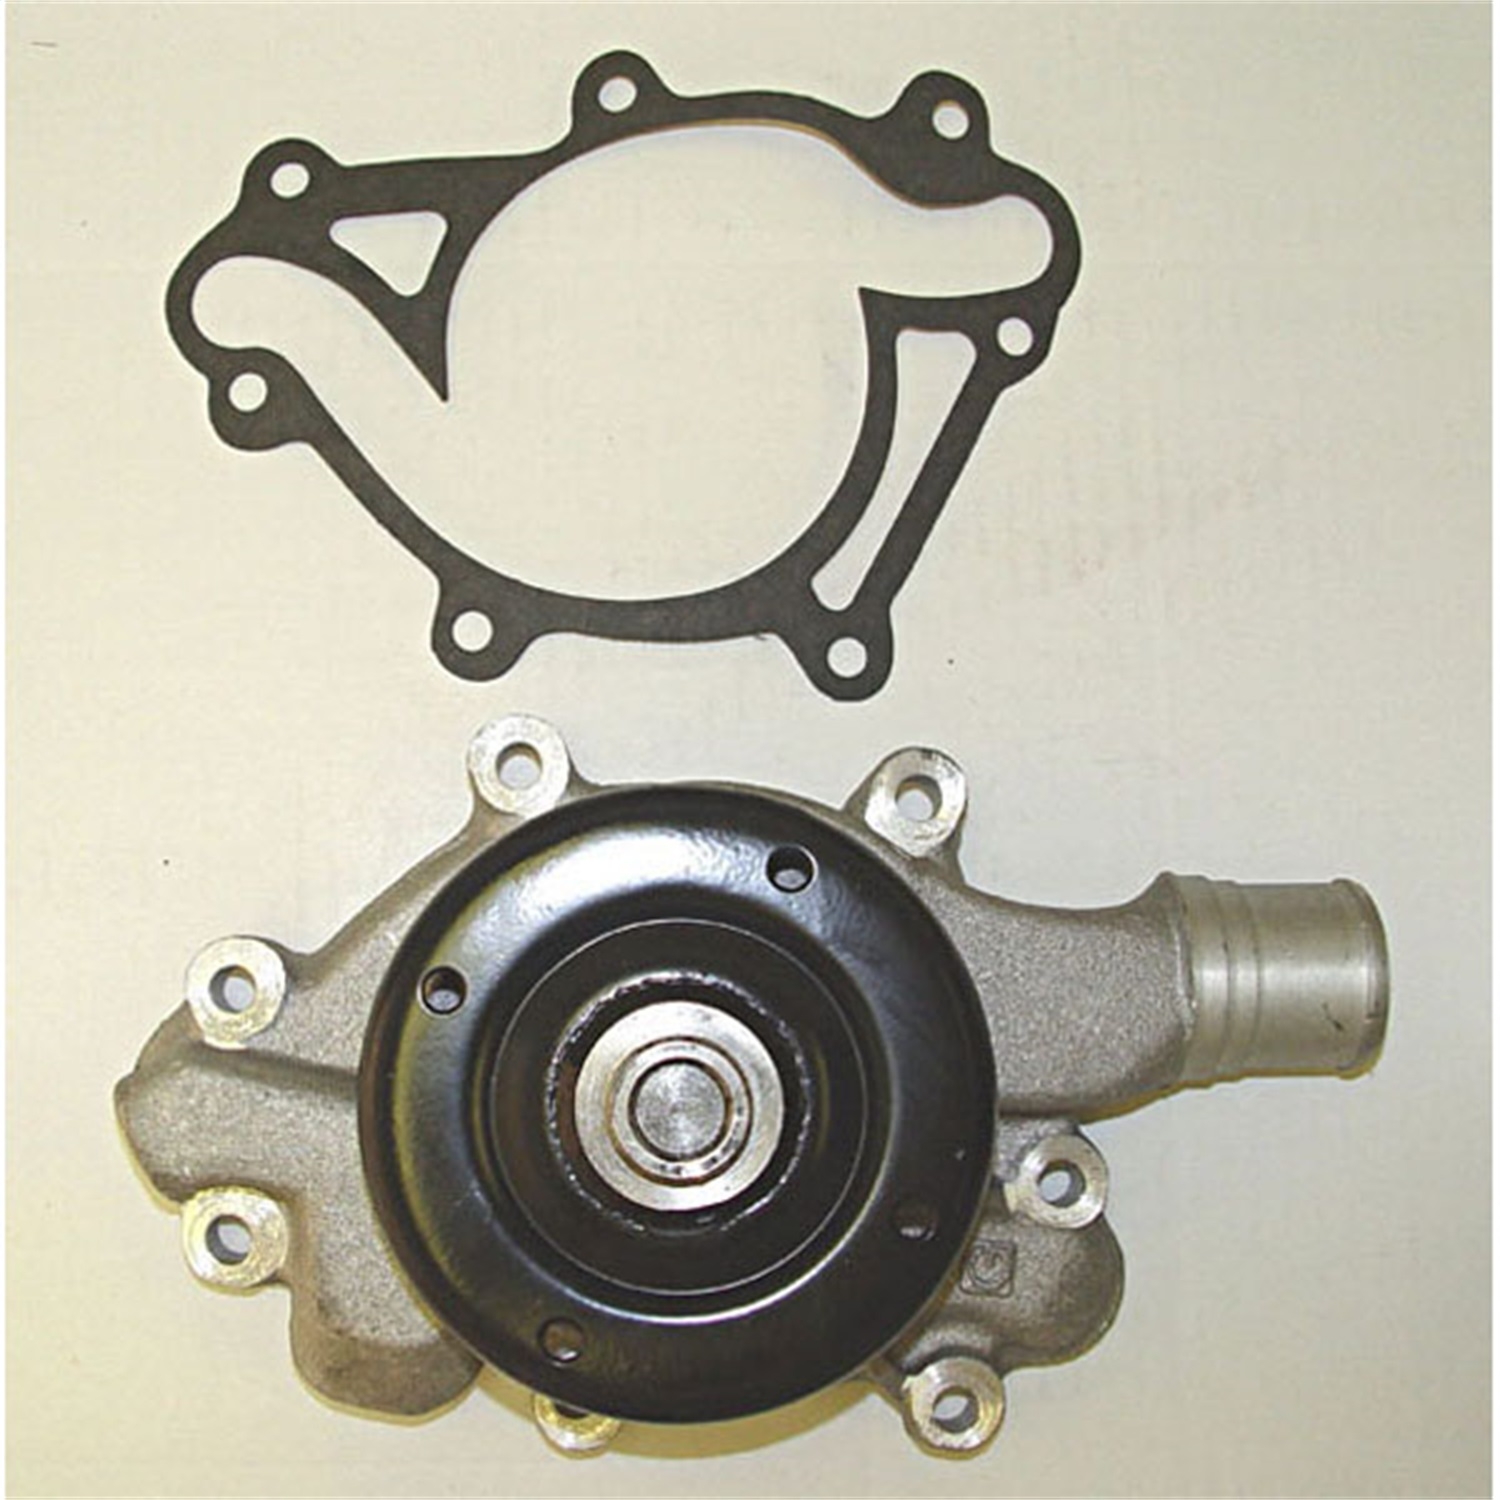 Omix This Replacement Water Pump From Omix Fits 93-98 Jeep Grand Cherokee With A 5.2 Liter Engine